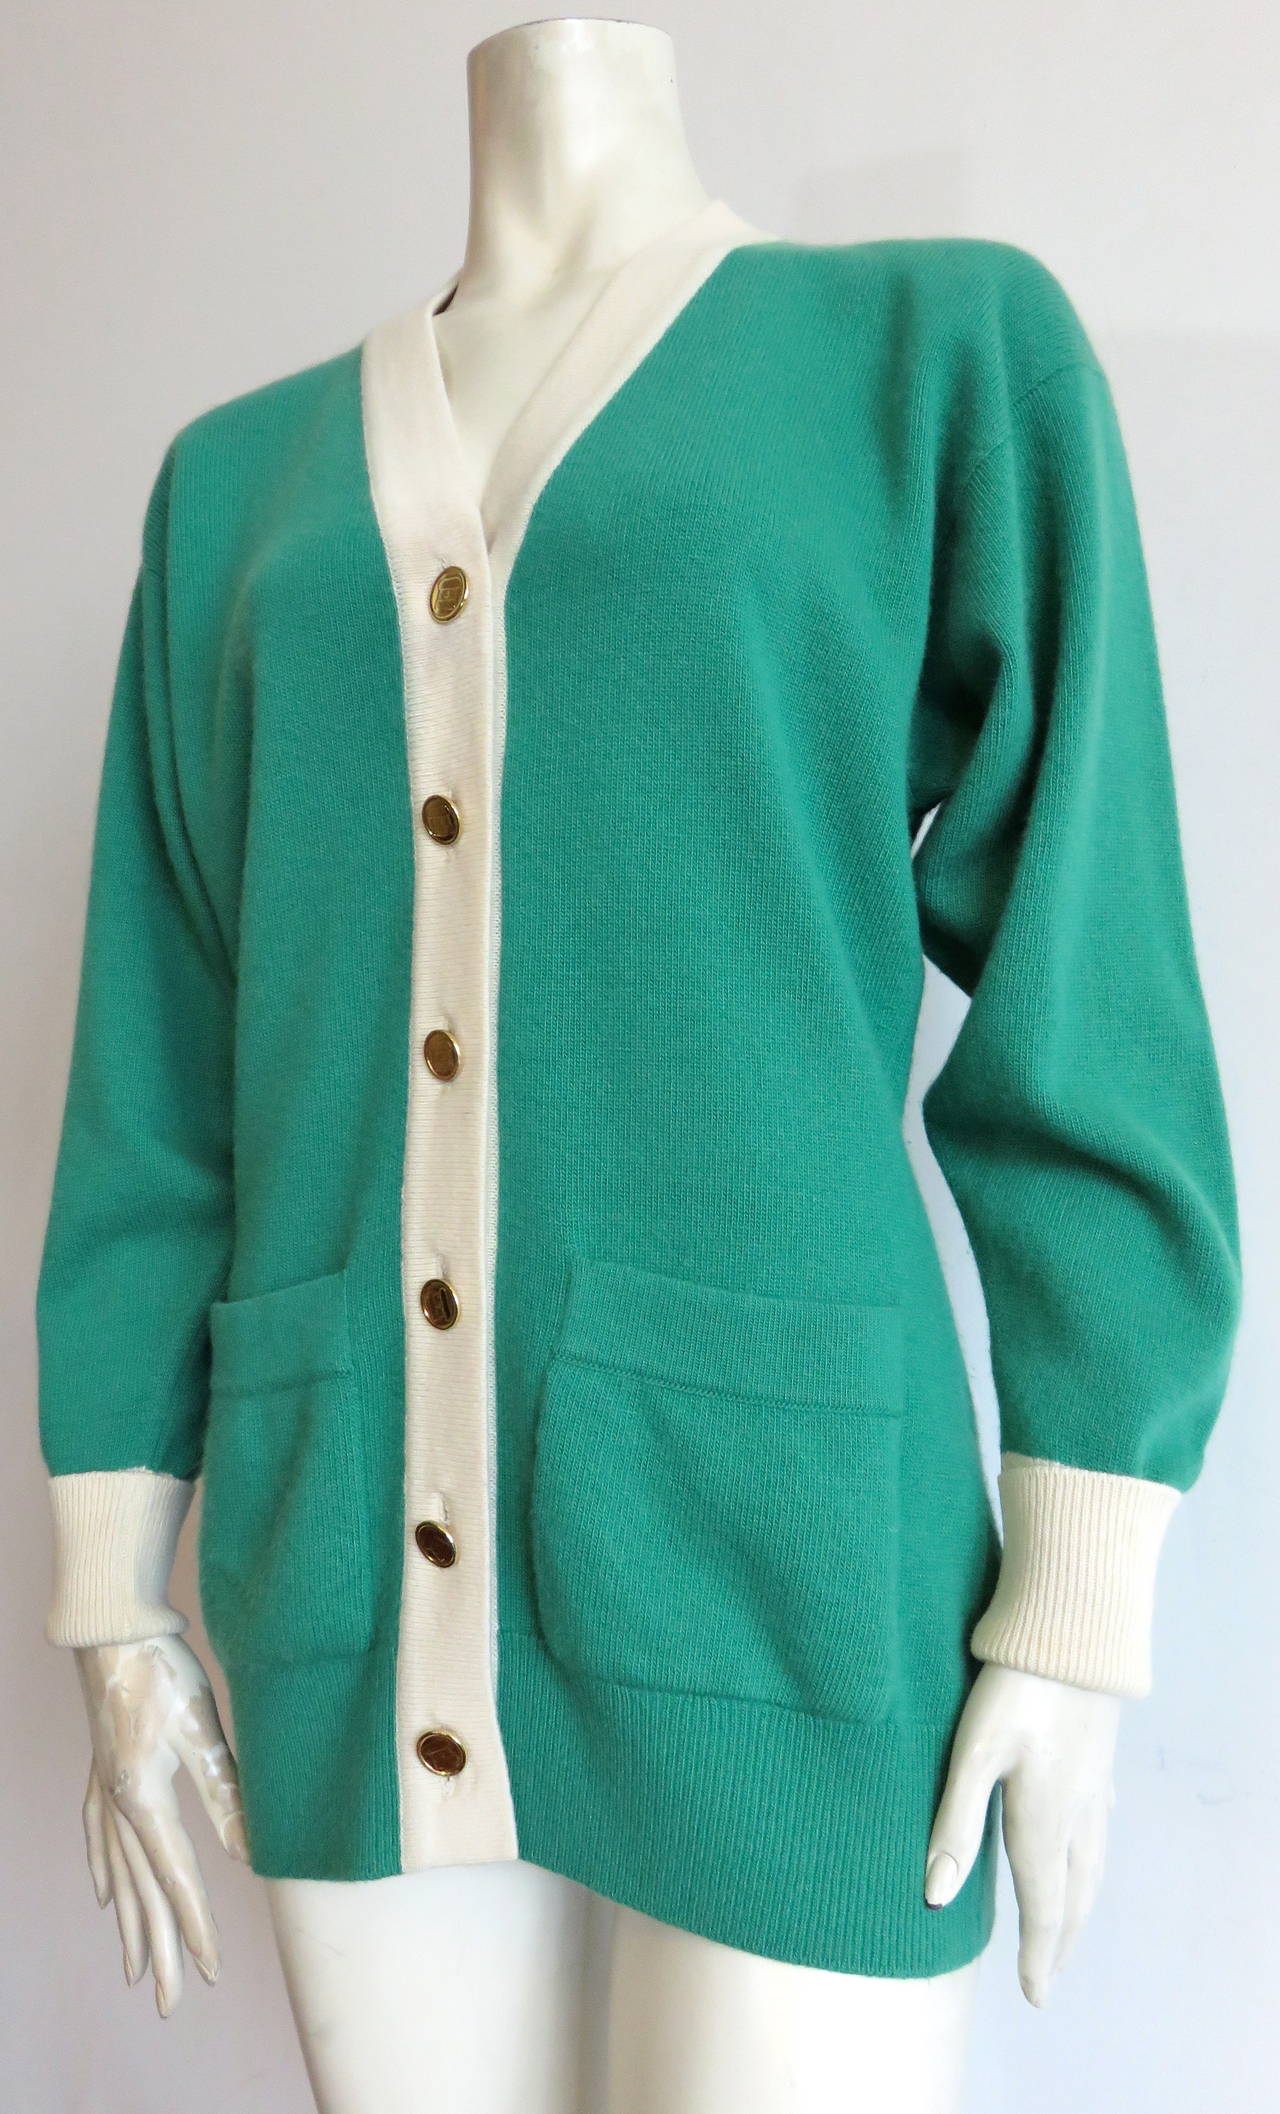 Excellent condition, CHANEL PARIS, pure cashmere cardigan jacket with novelty, 'CC' purse logo engraved buttons.

Luxuriously soft, knit cashmere fabrication in a beautiful shade of green and ivory.

Longer-length silhouette with six button